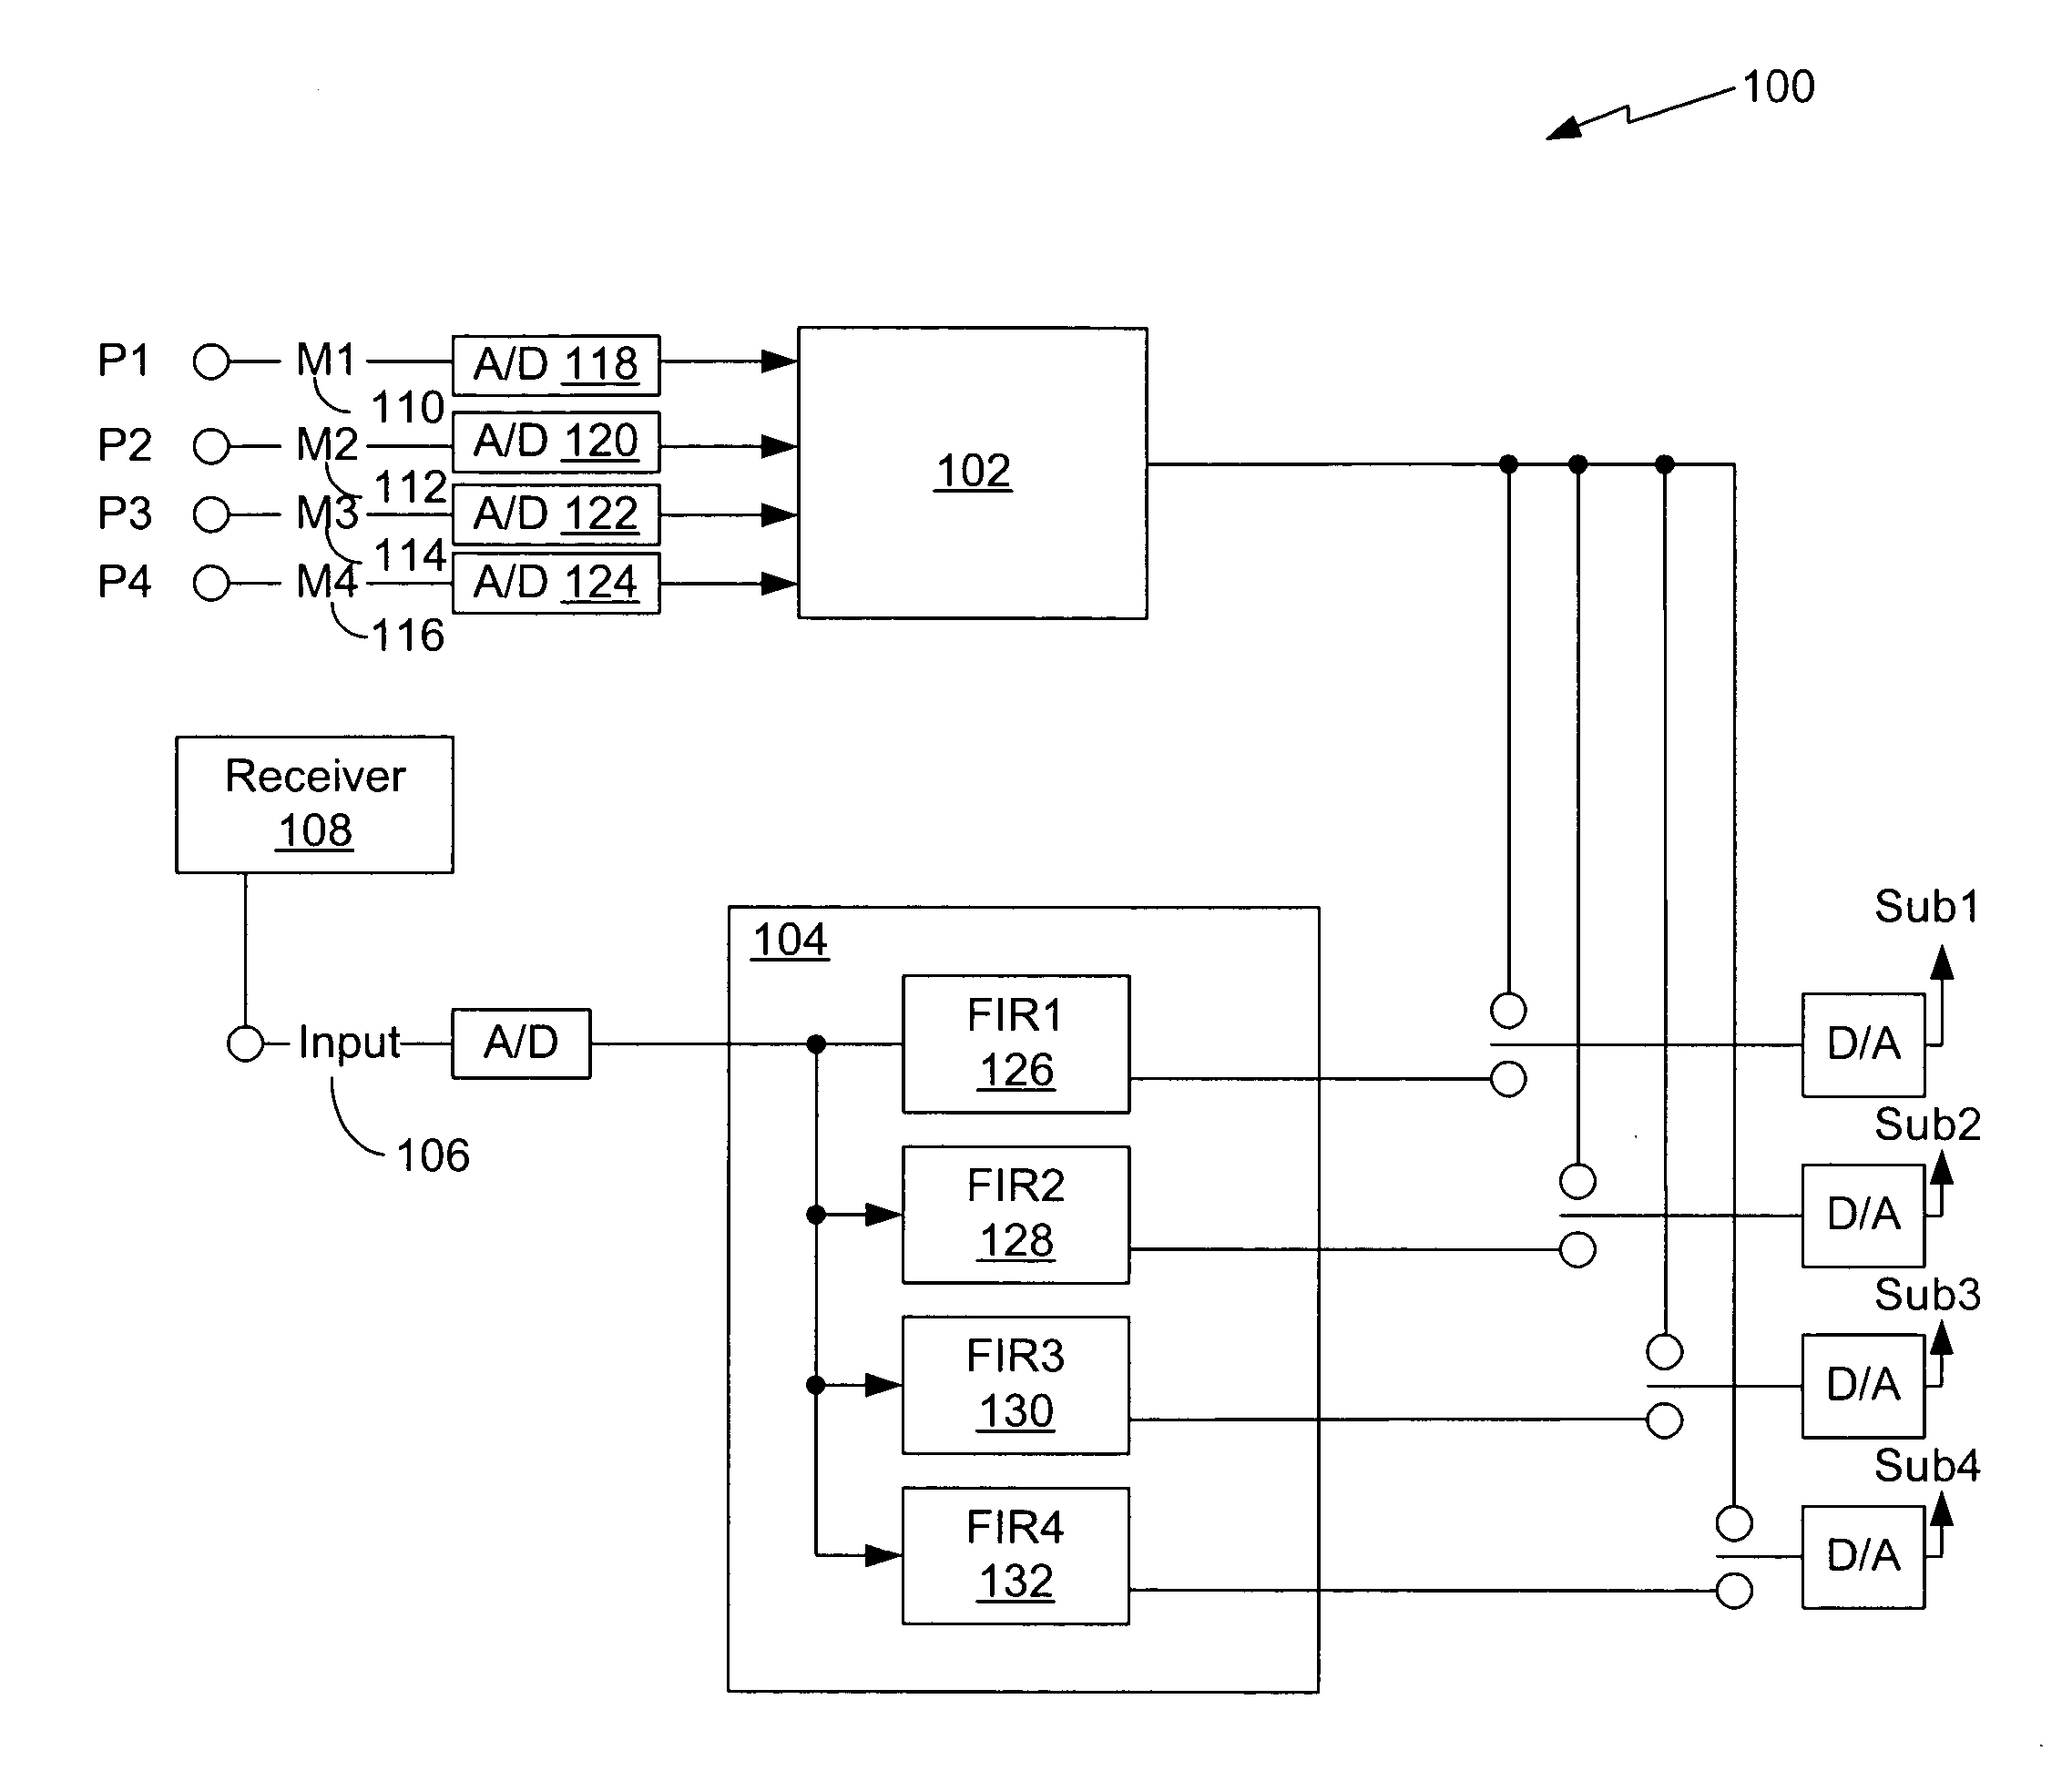 Reduced latency low frequency equalization system